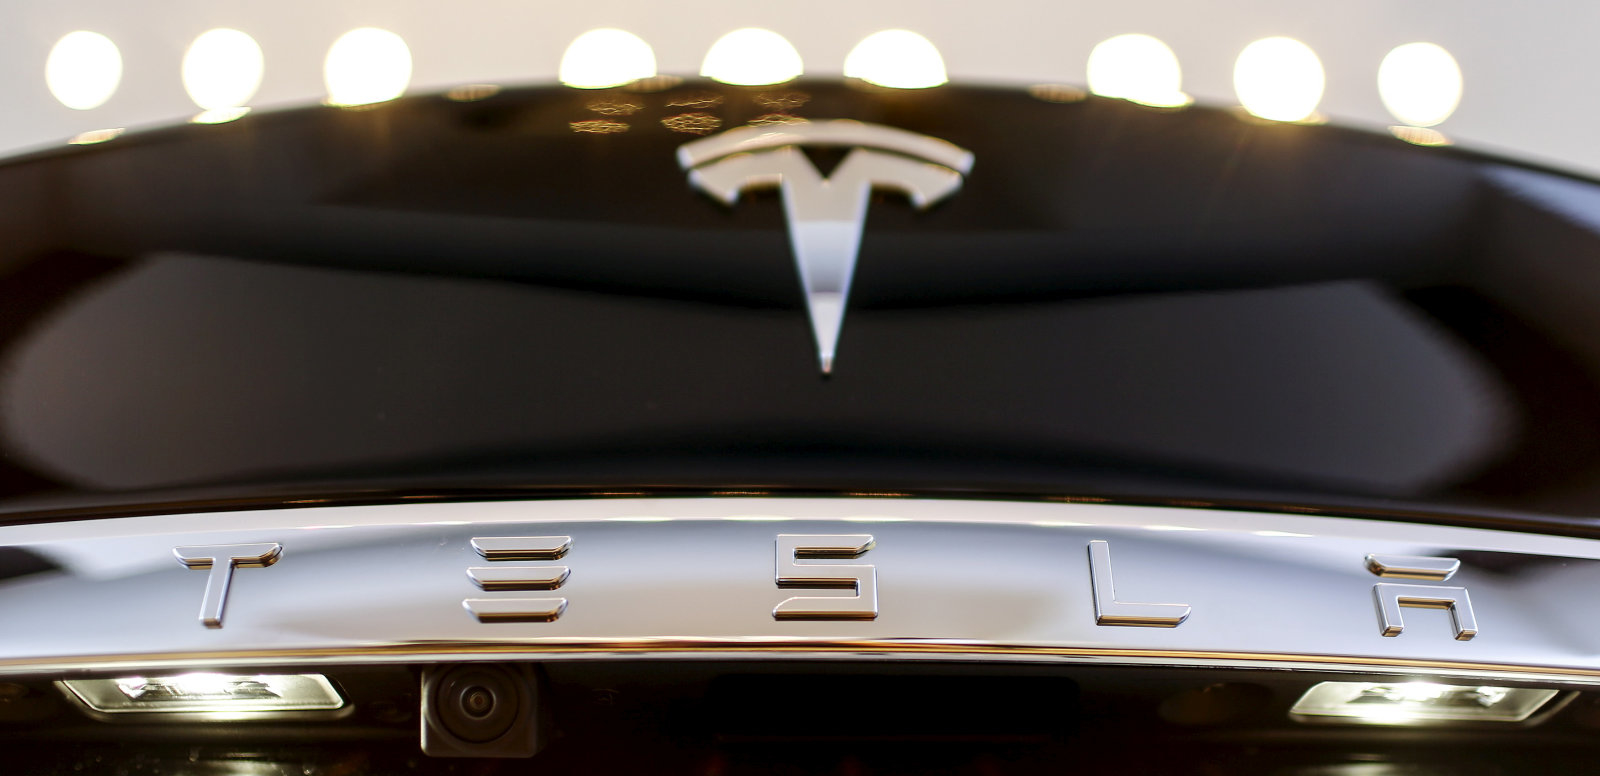 Tesla is recalling 53,000 vehicles due to electric parking brake issue